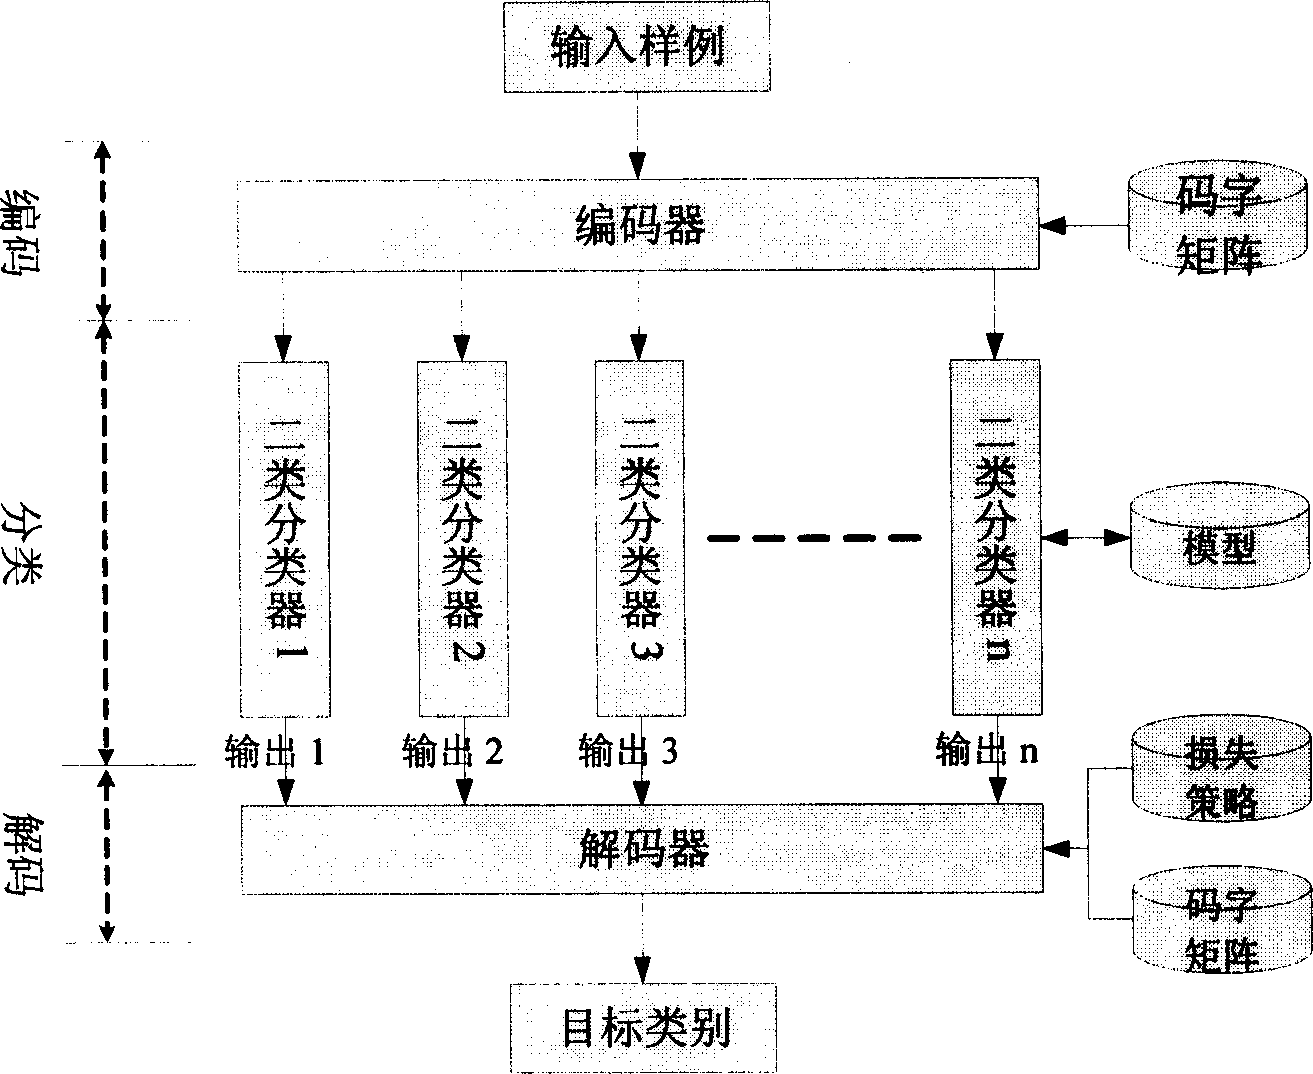 Semantic classification method for Chinese question